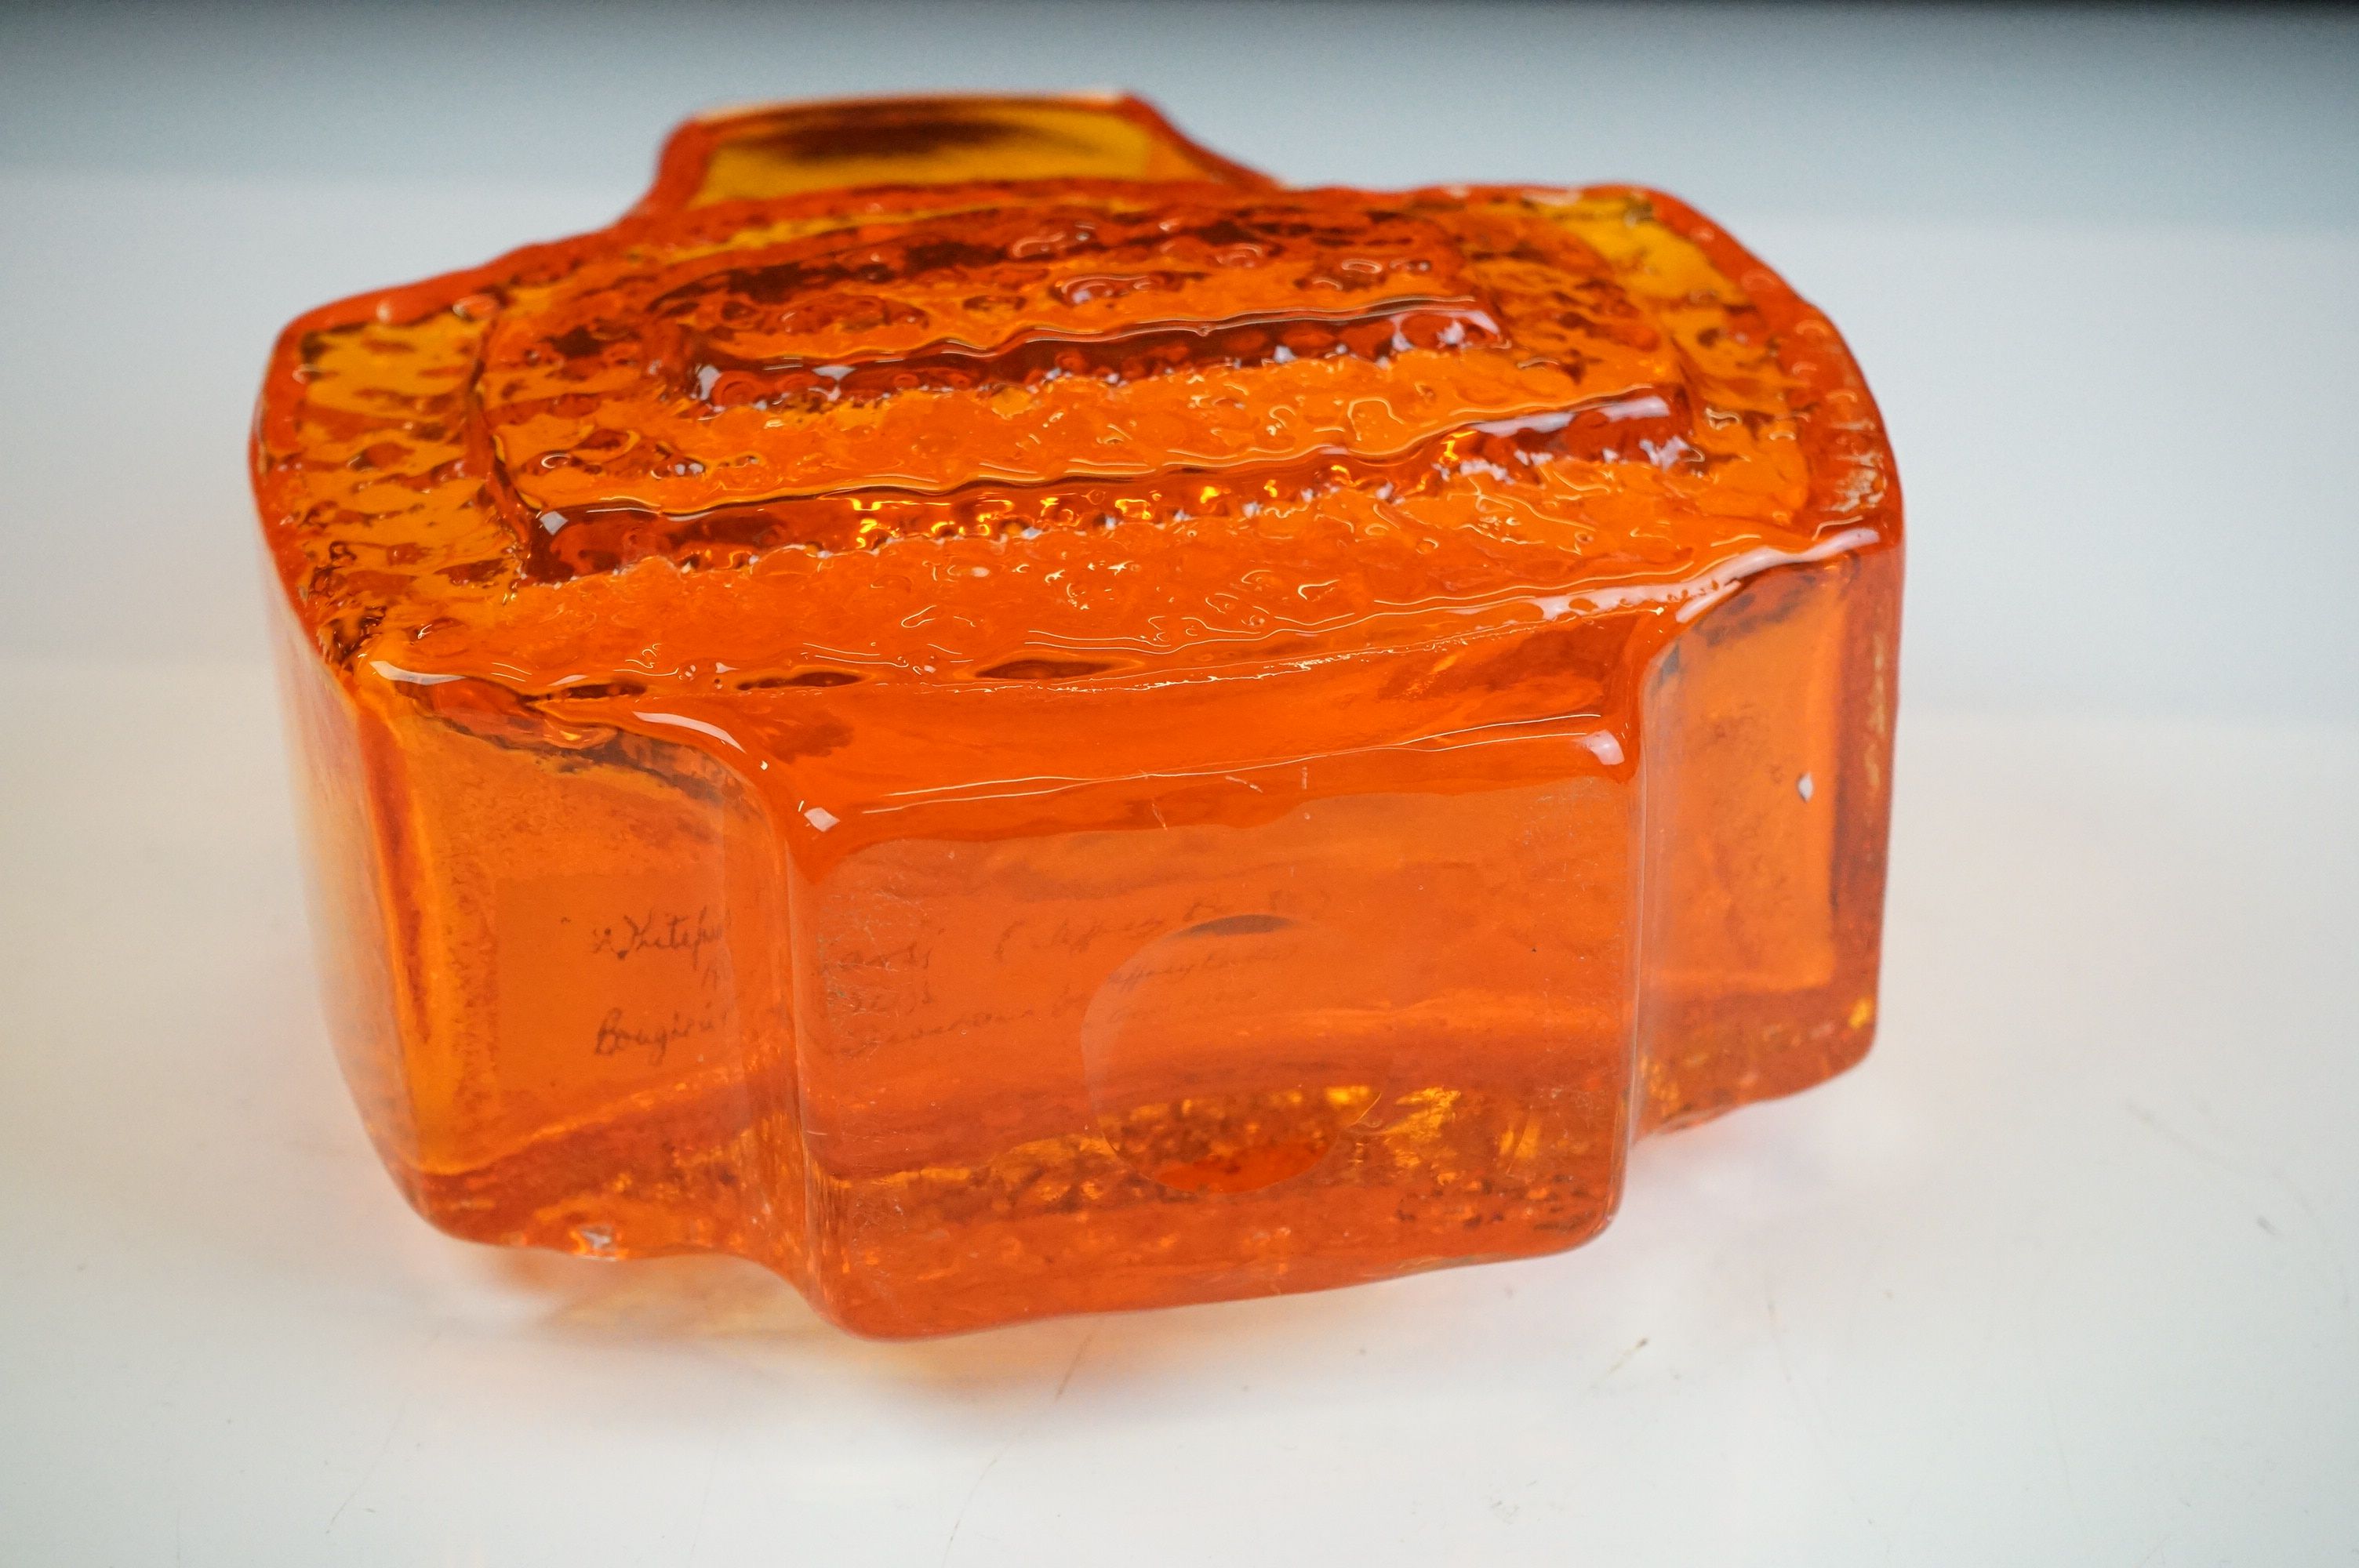 Whitefriars Textured Glass Concentric ' TV ' Pattern Vase, pattern no. 9677, in the Tangerine - Image 9 of 9